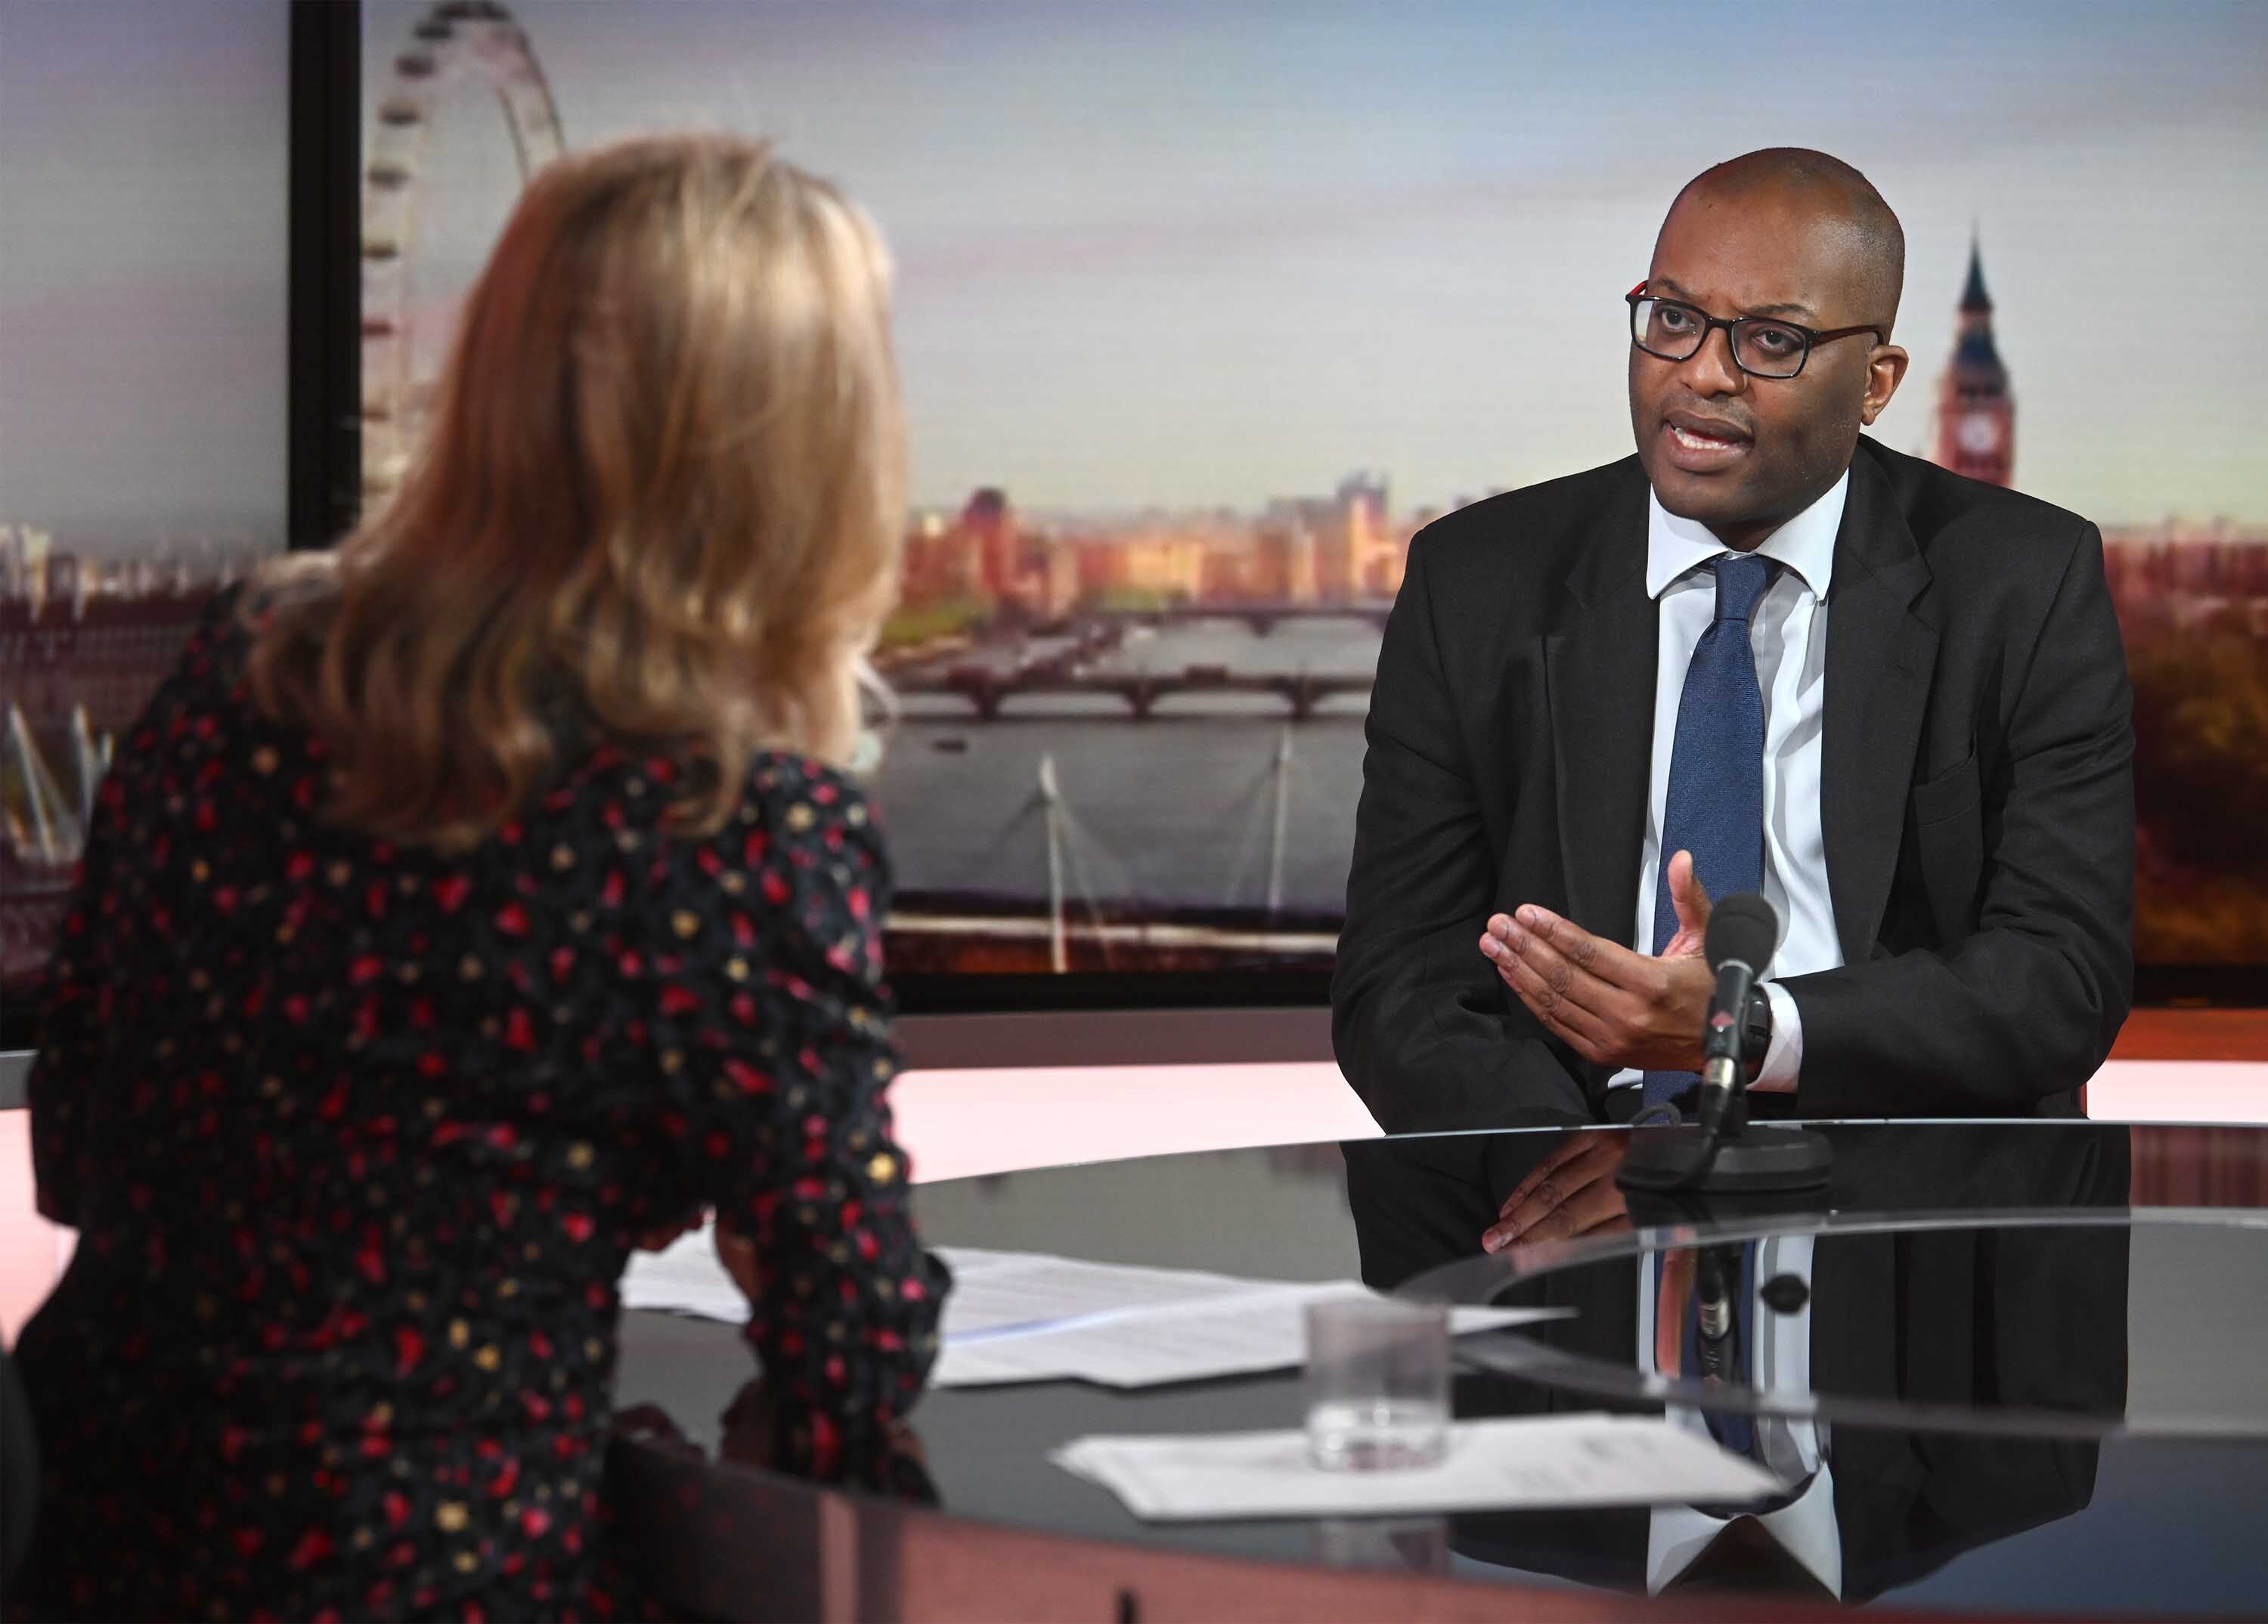 Business Secretary Kwasi Kwarteng, with host Sophie Raworth, appearing on the BBC1 current affairs programme, Sunday Morning. (Jeff Overs/BBC)